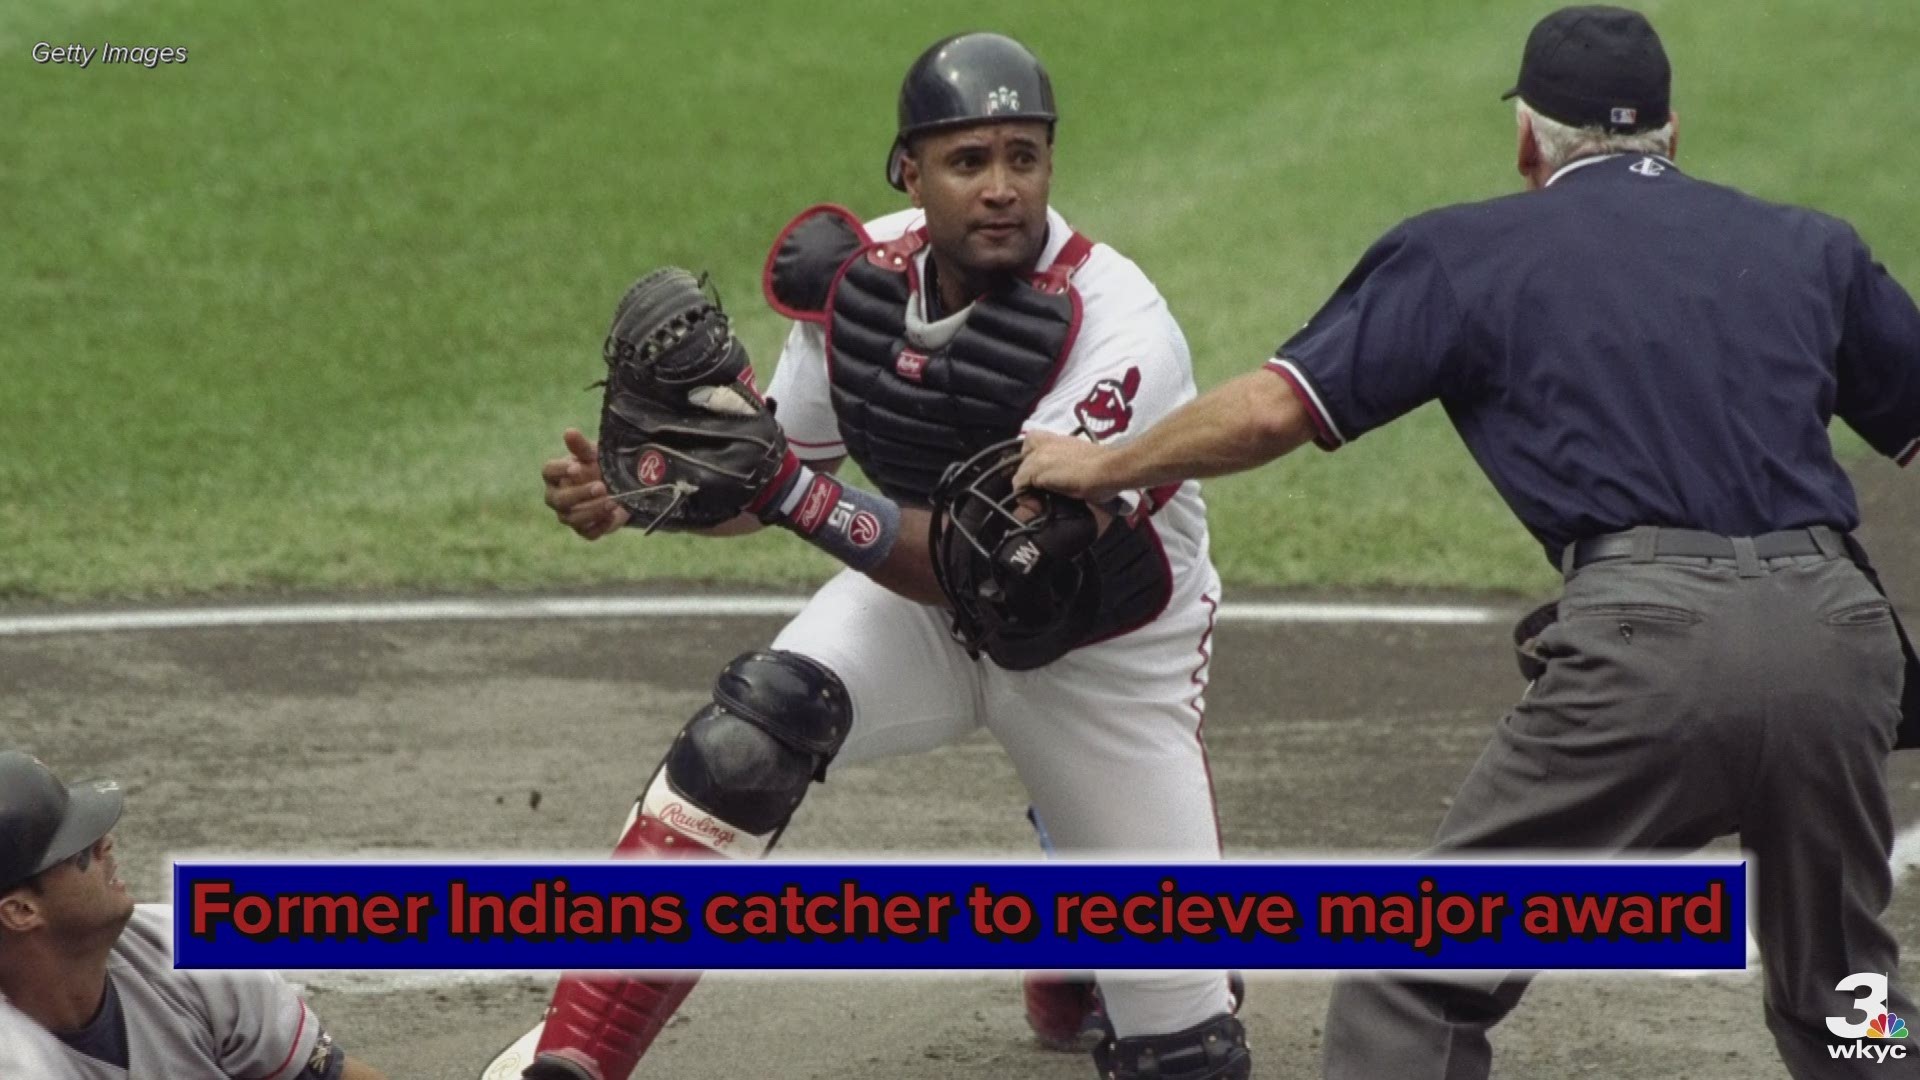 Catcher Sandy Alomar of the Cleveland Indians wears a helmet equipped  News Photo - Getty Images